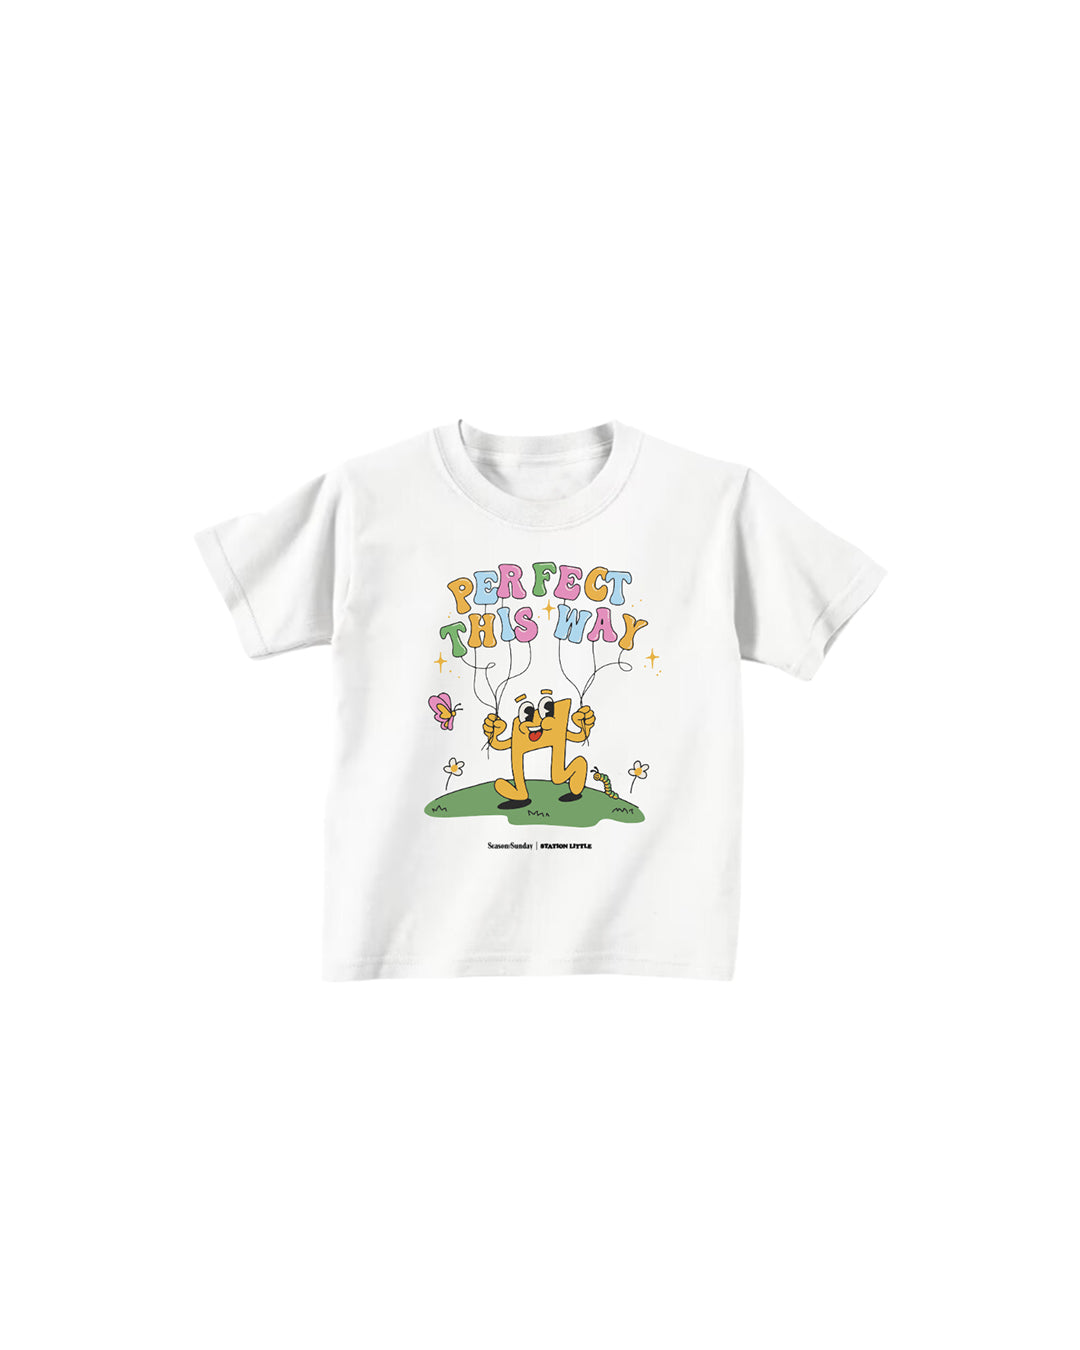 Perfect This Way Tee (Youth)